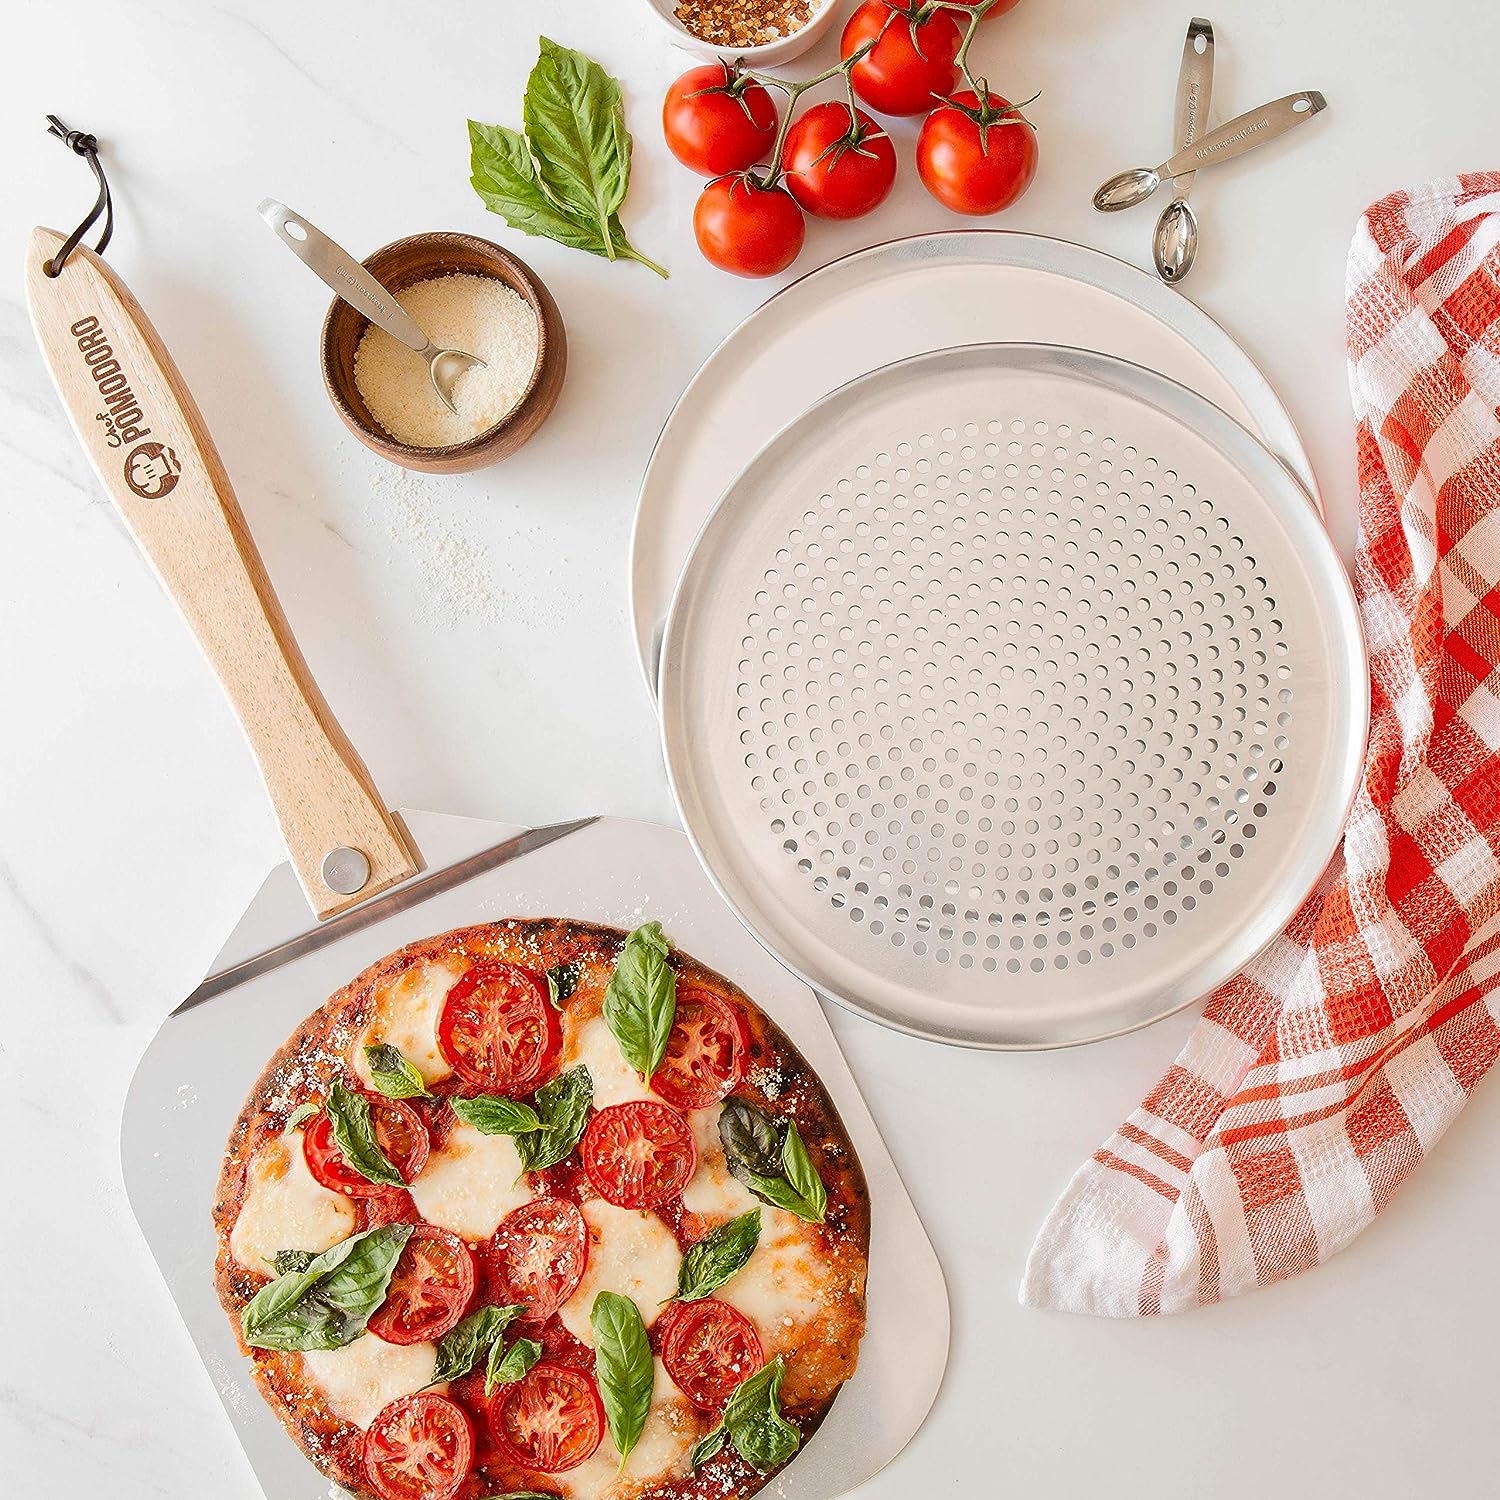 Chef Pomodoro Pizza Baking Set with 3 Pizza Pans and Pizza Tray